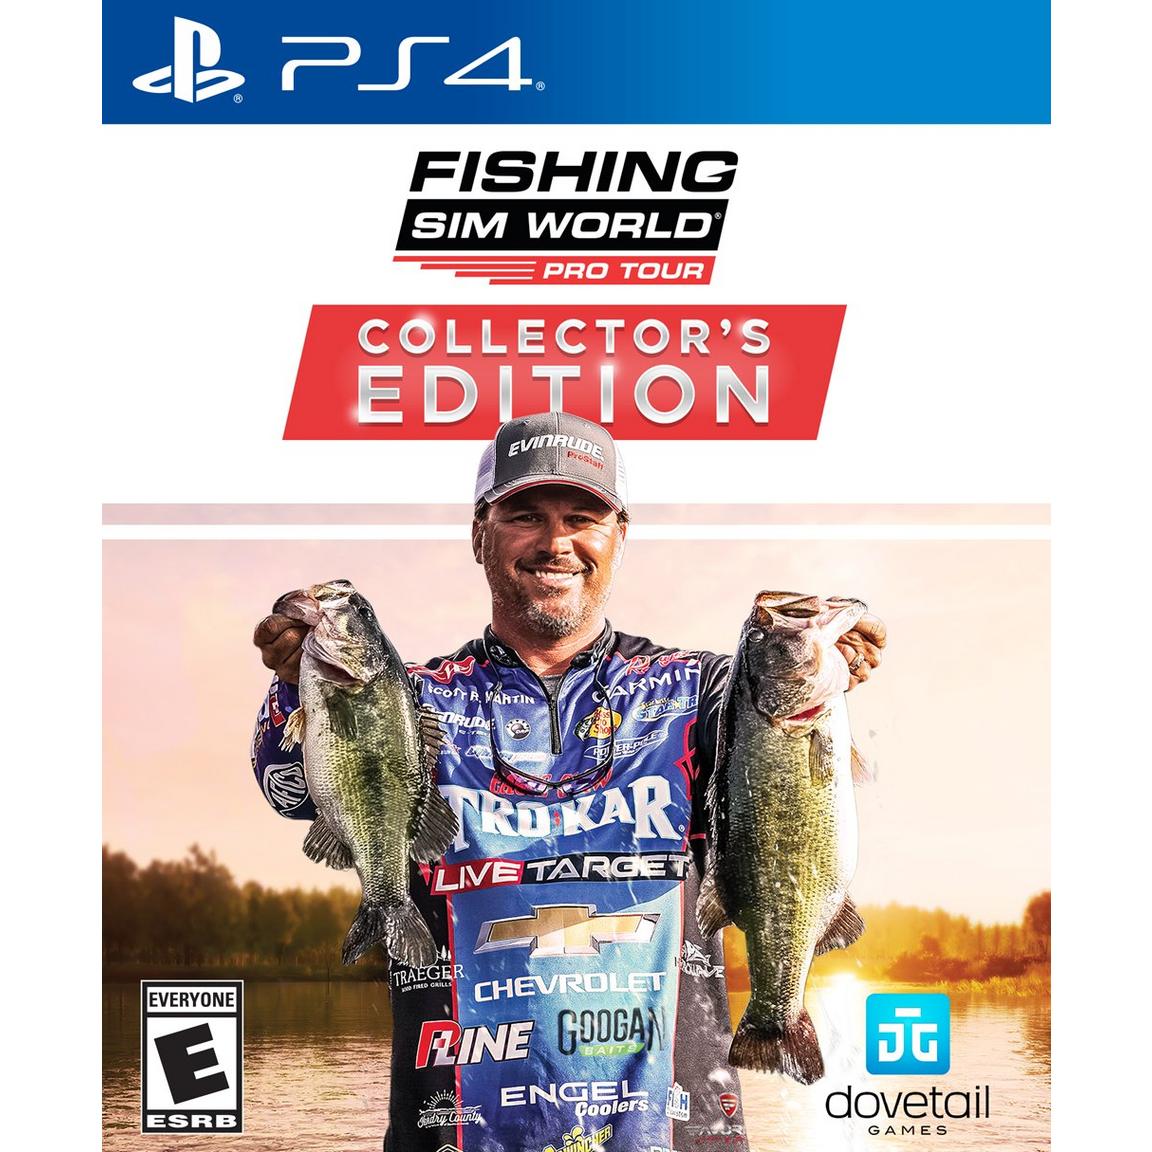 Fishing Sim World: Pro Tour Collector's Edition - PlayStation 4, Pre-Owned